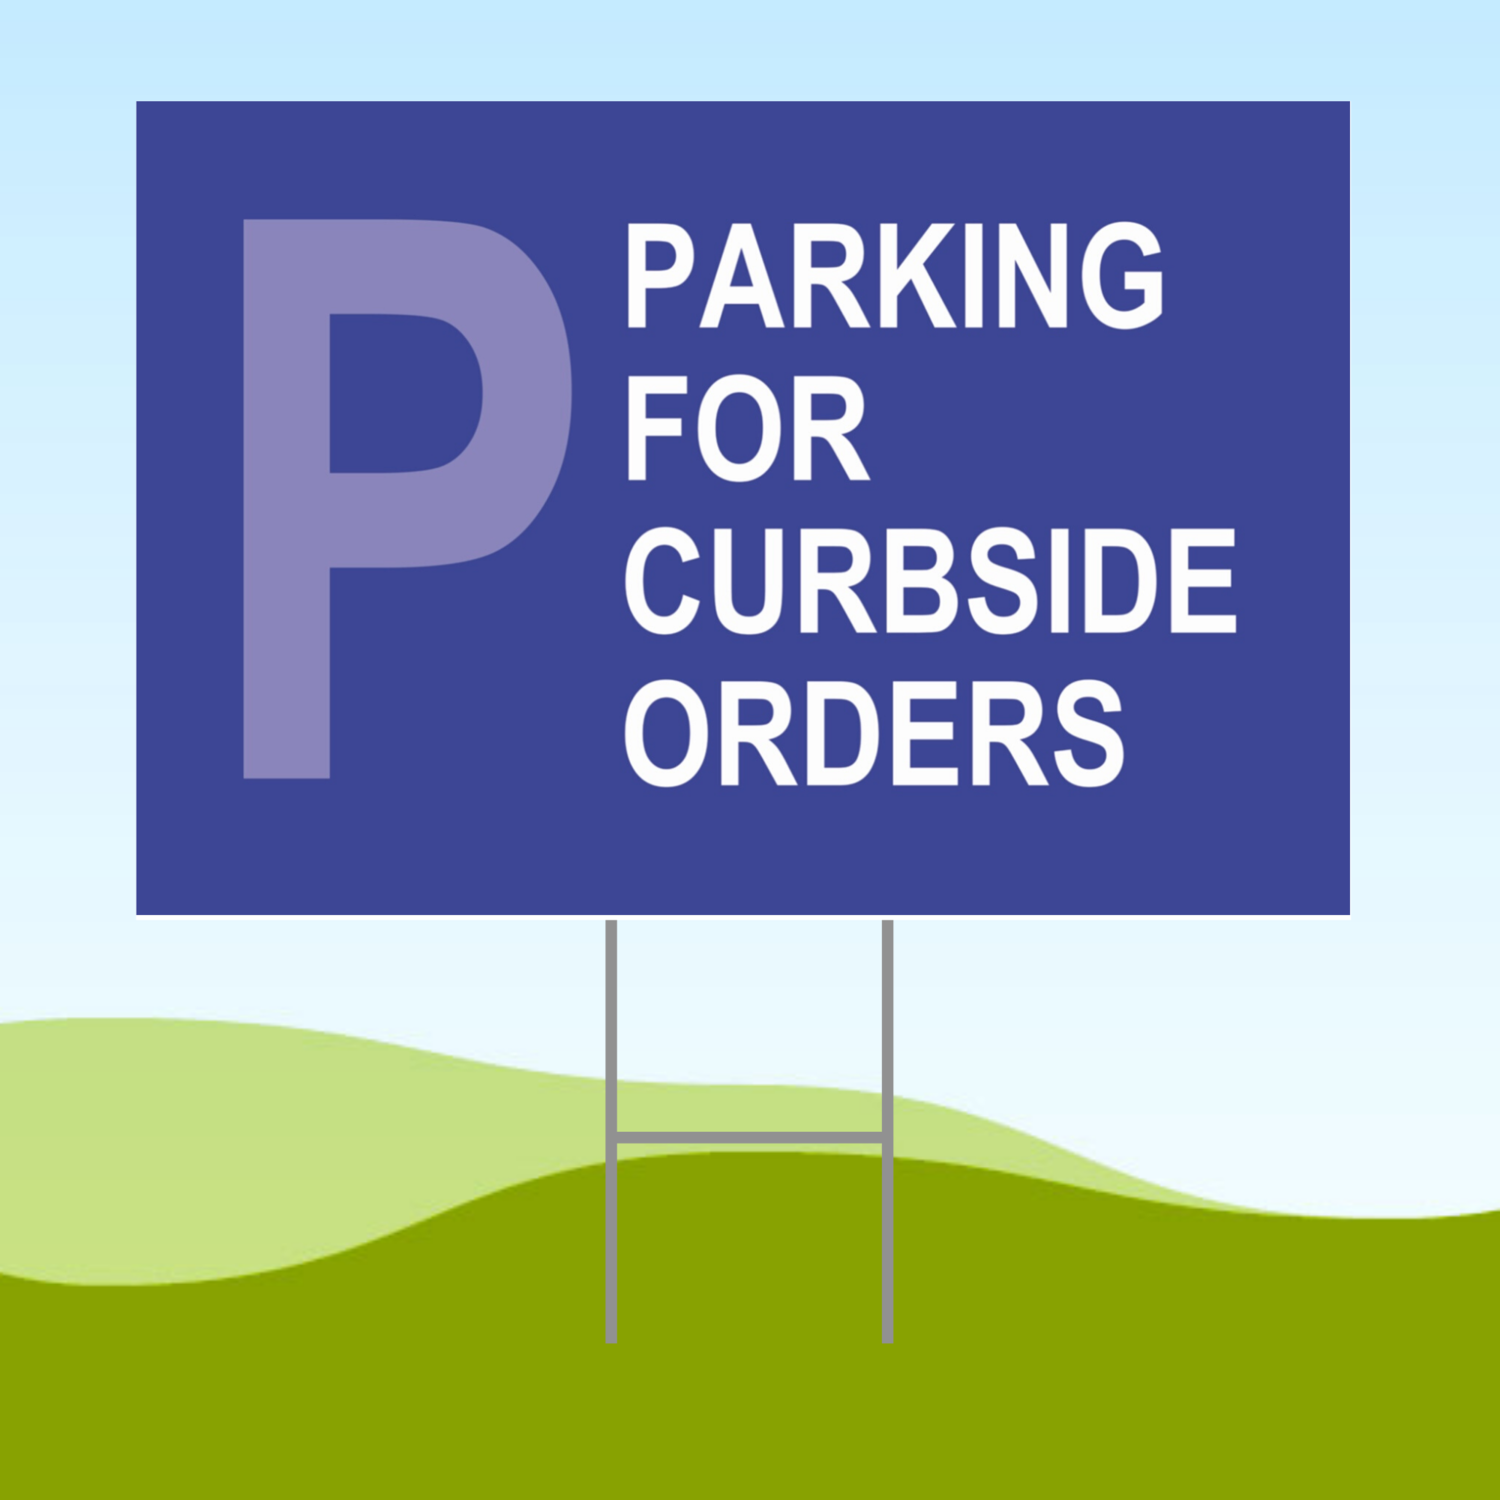 Parking For Curbside Orders 18x24 Yard Sign WITH STAKE Corrugated Plastic Bandit